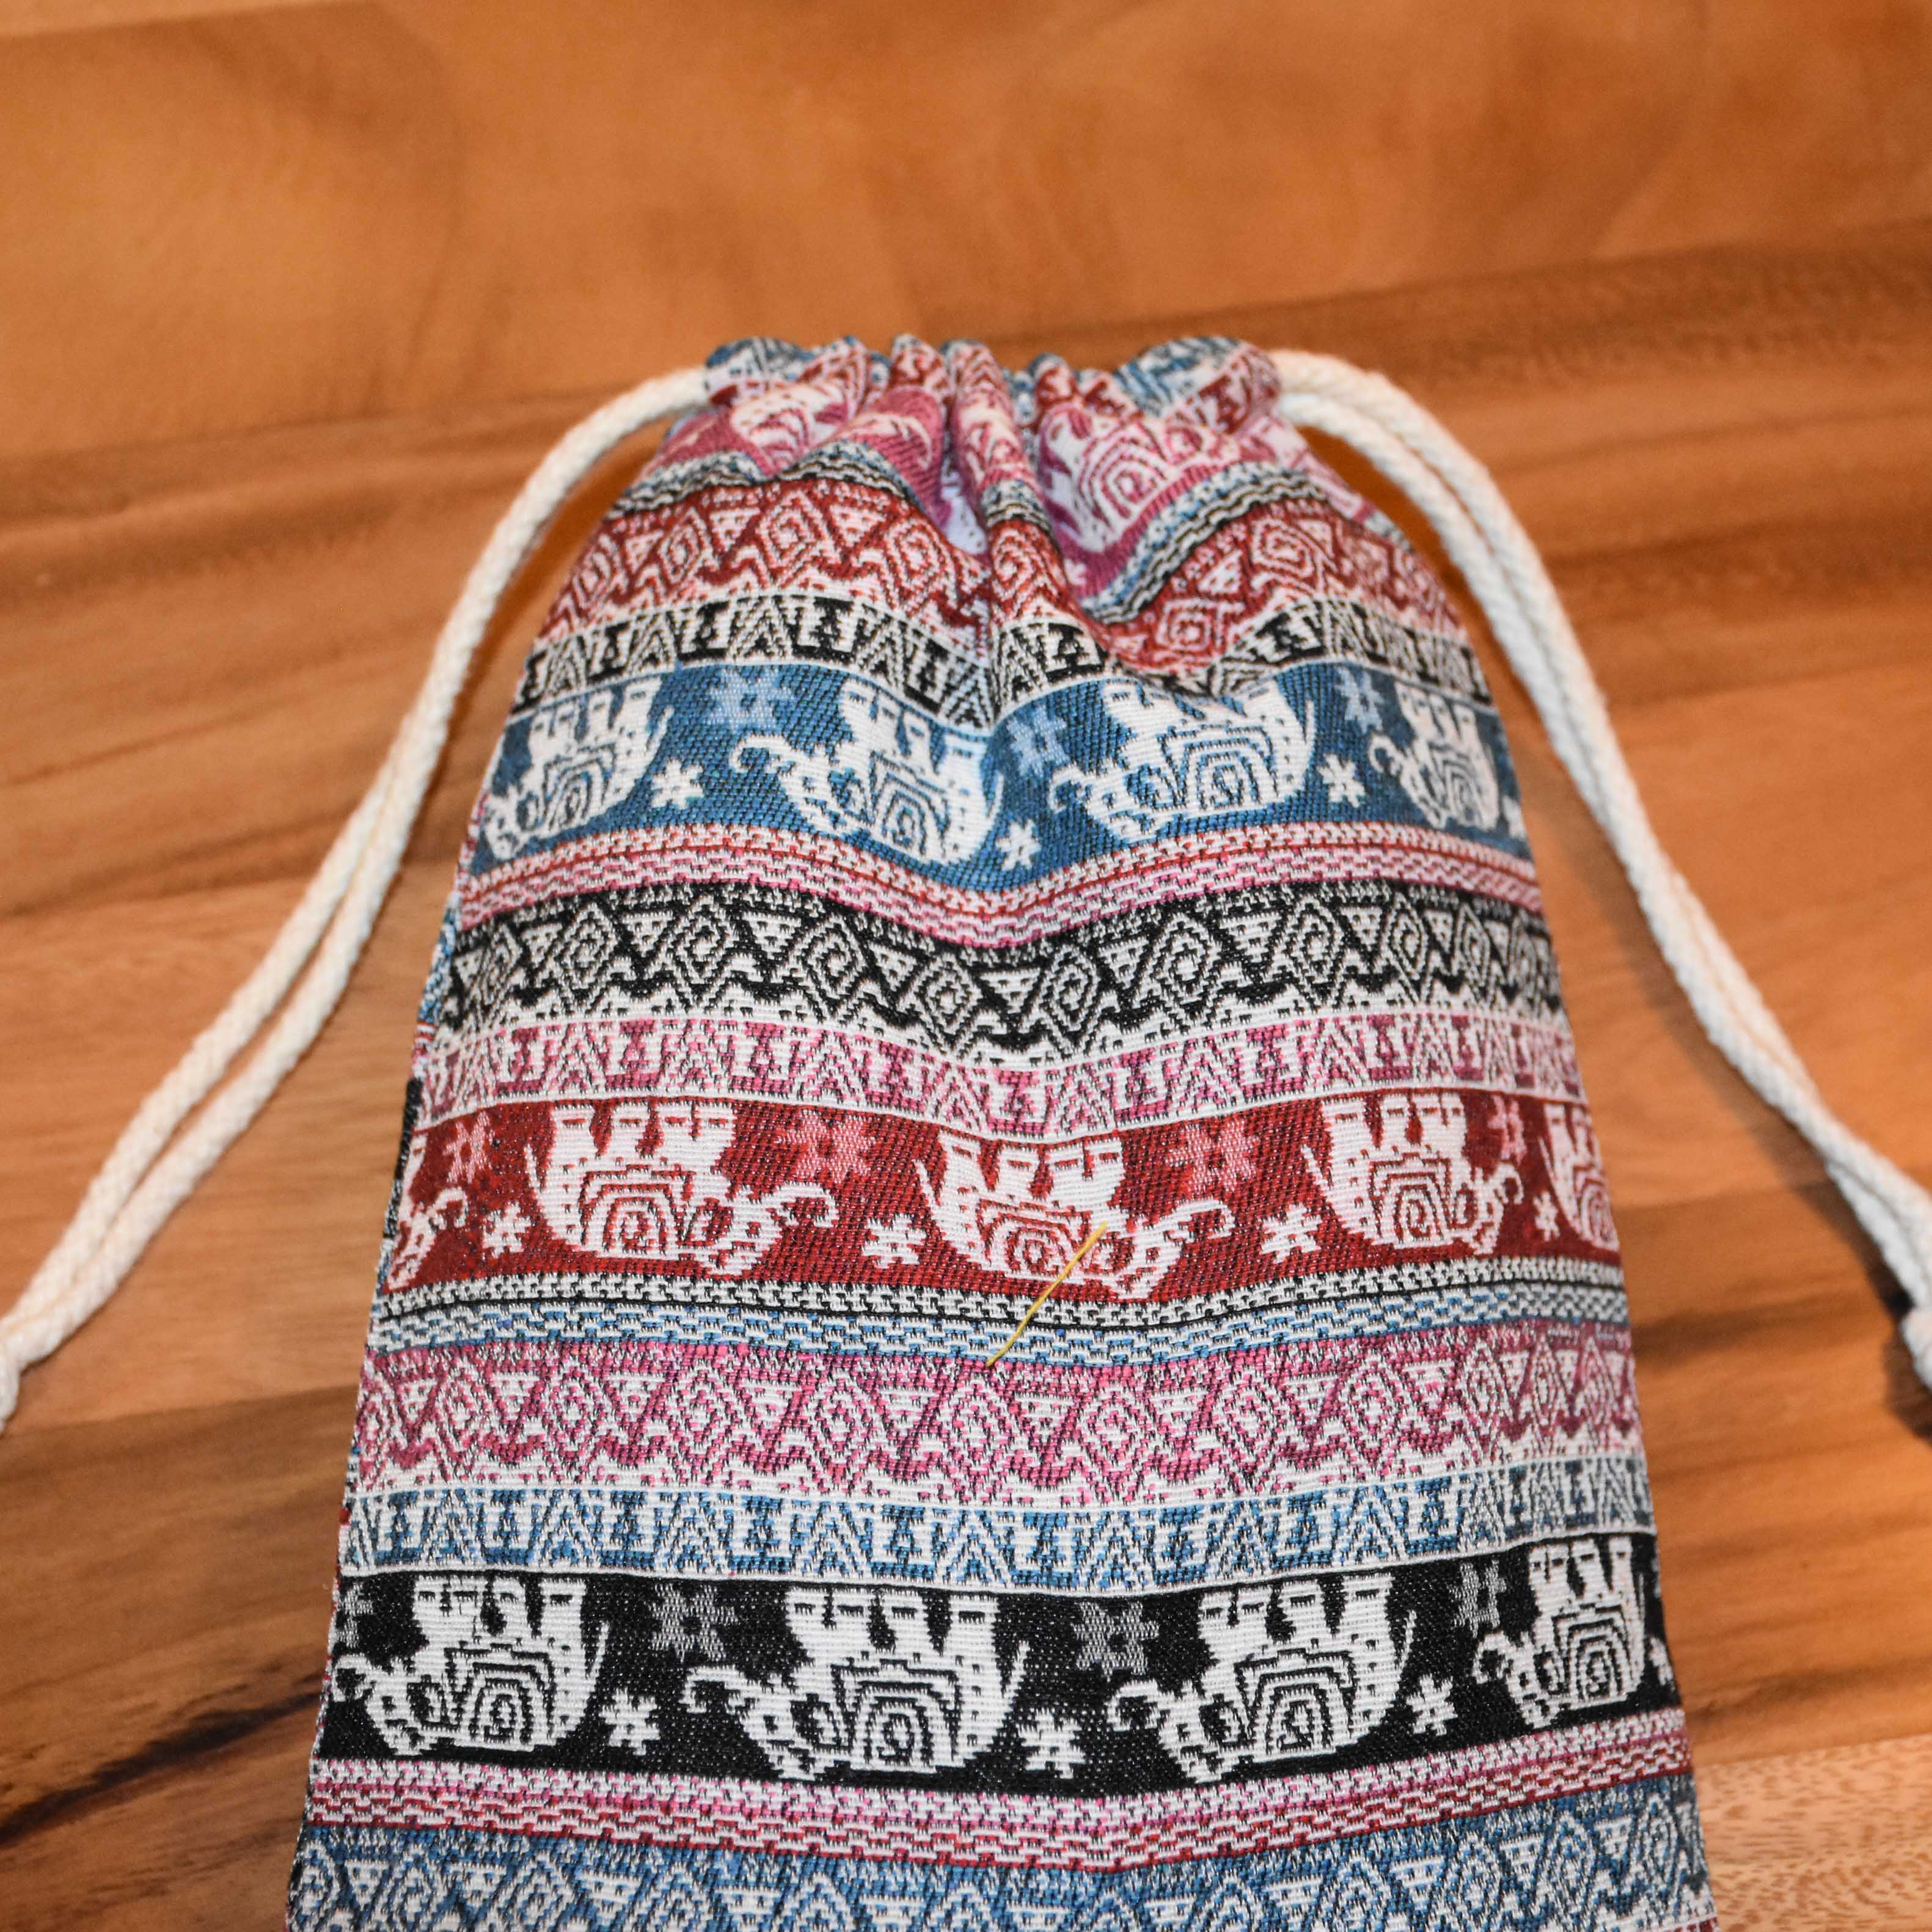 CEIBA TRAVEL BAG Elepanta Travel Bags - Buy Today Elephant Pants Jewelry And Bohemian Clothes Handmade In Thailand Help To Save The Elephants FairTrade And Vegan